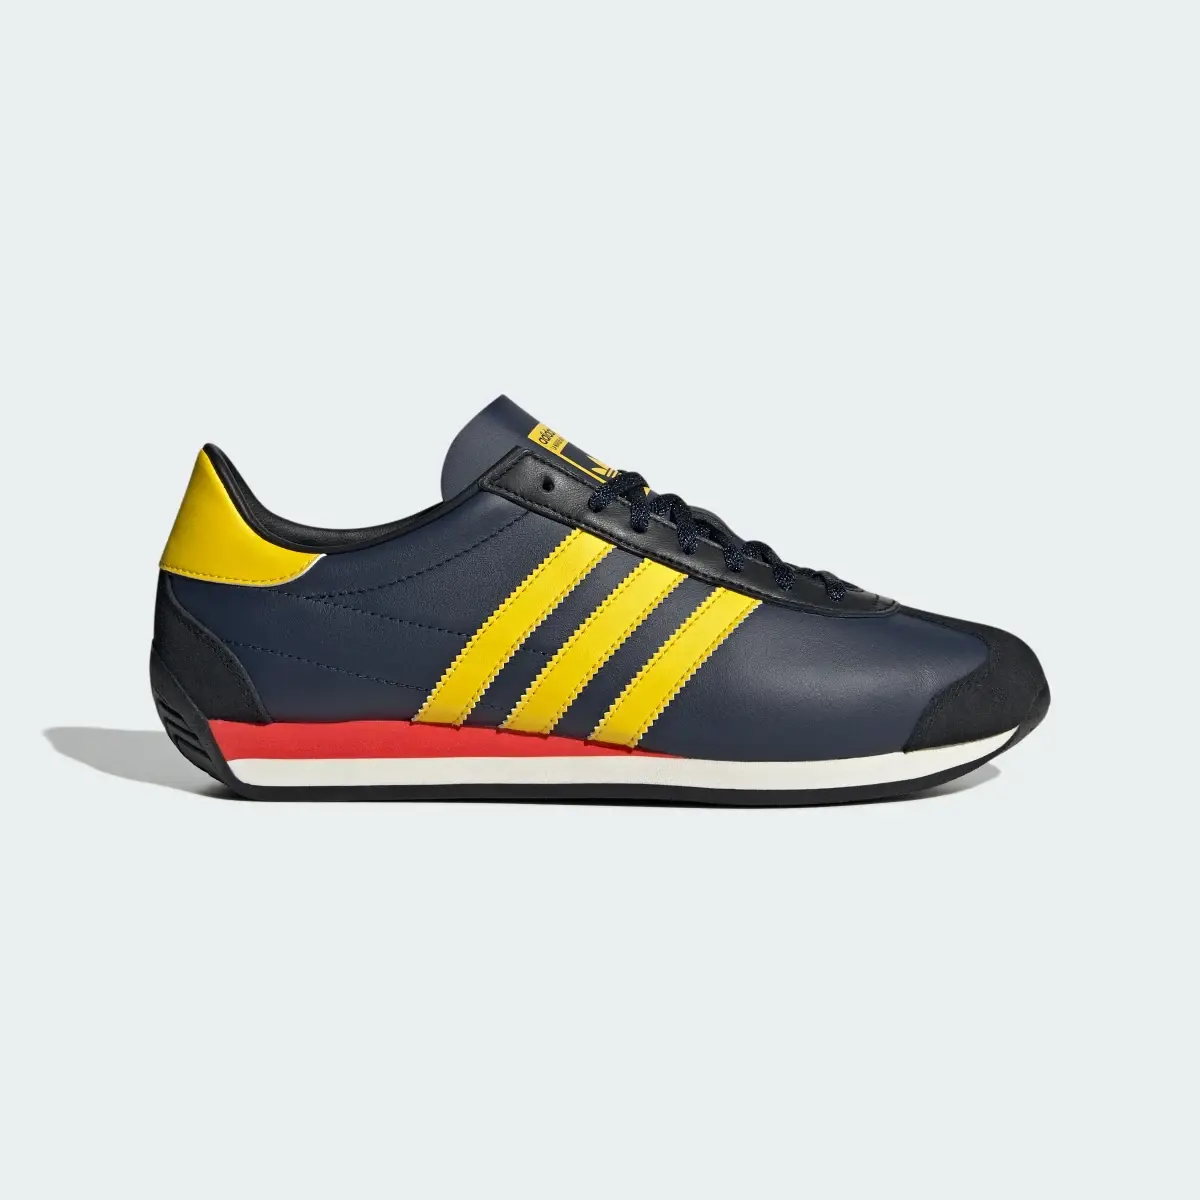 Adidas Country OG Shoes. 2